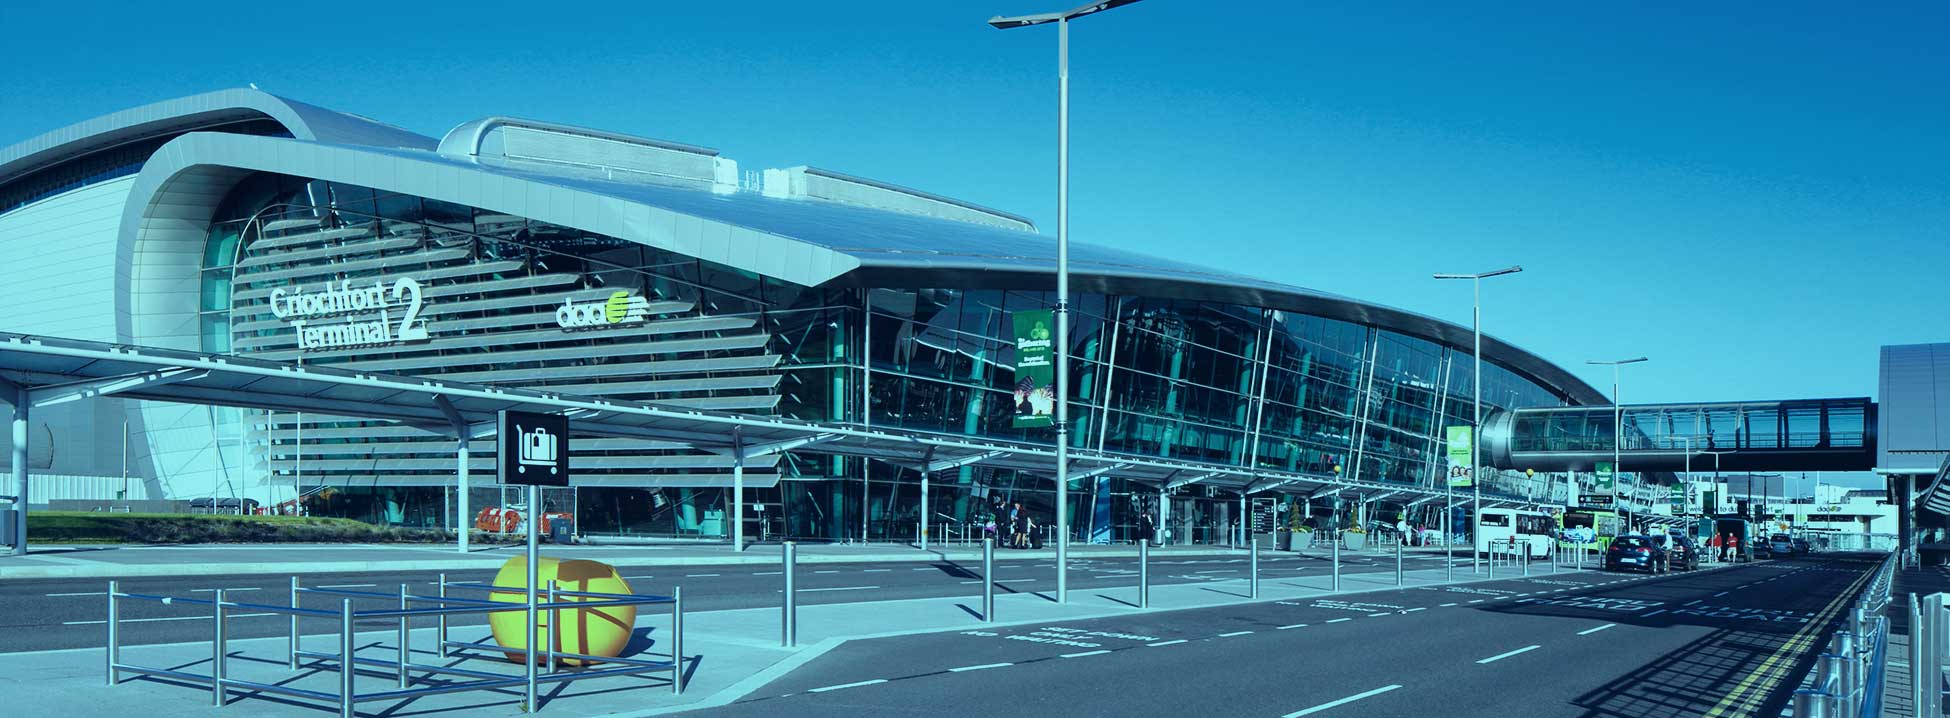 Dublin-Airport-Speed-up-Security-Lines-with-Veovo-Technology